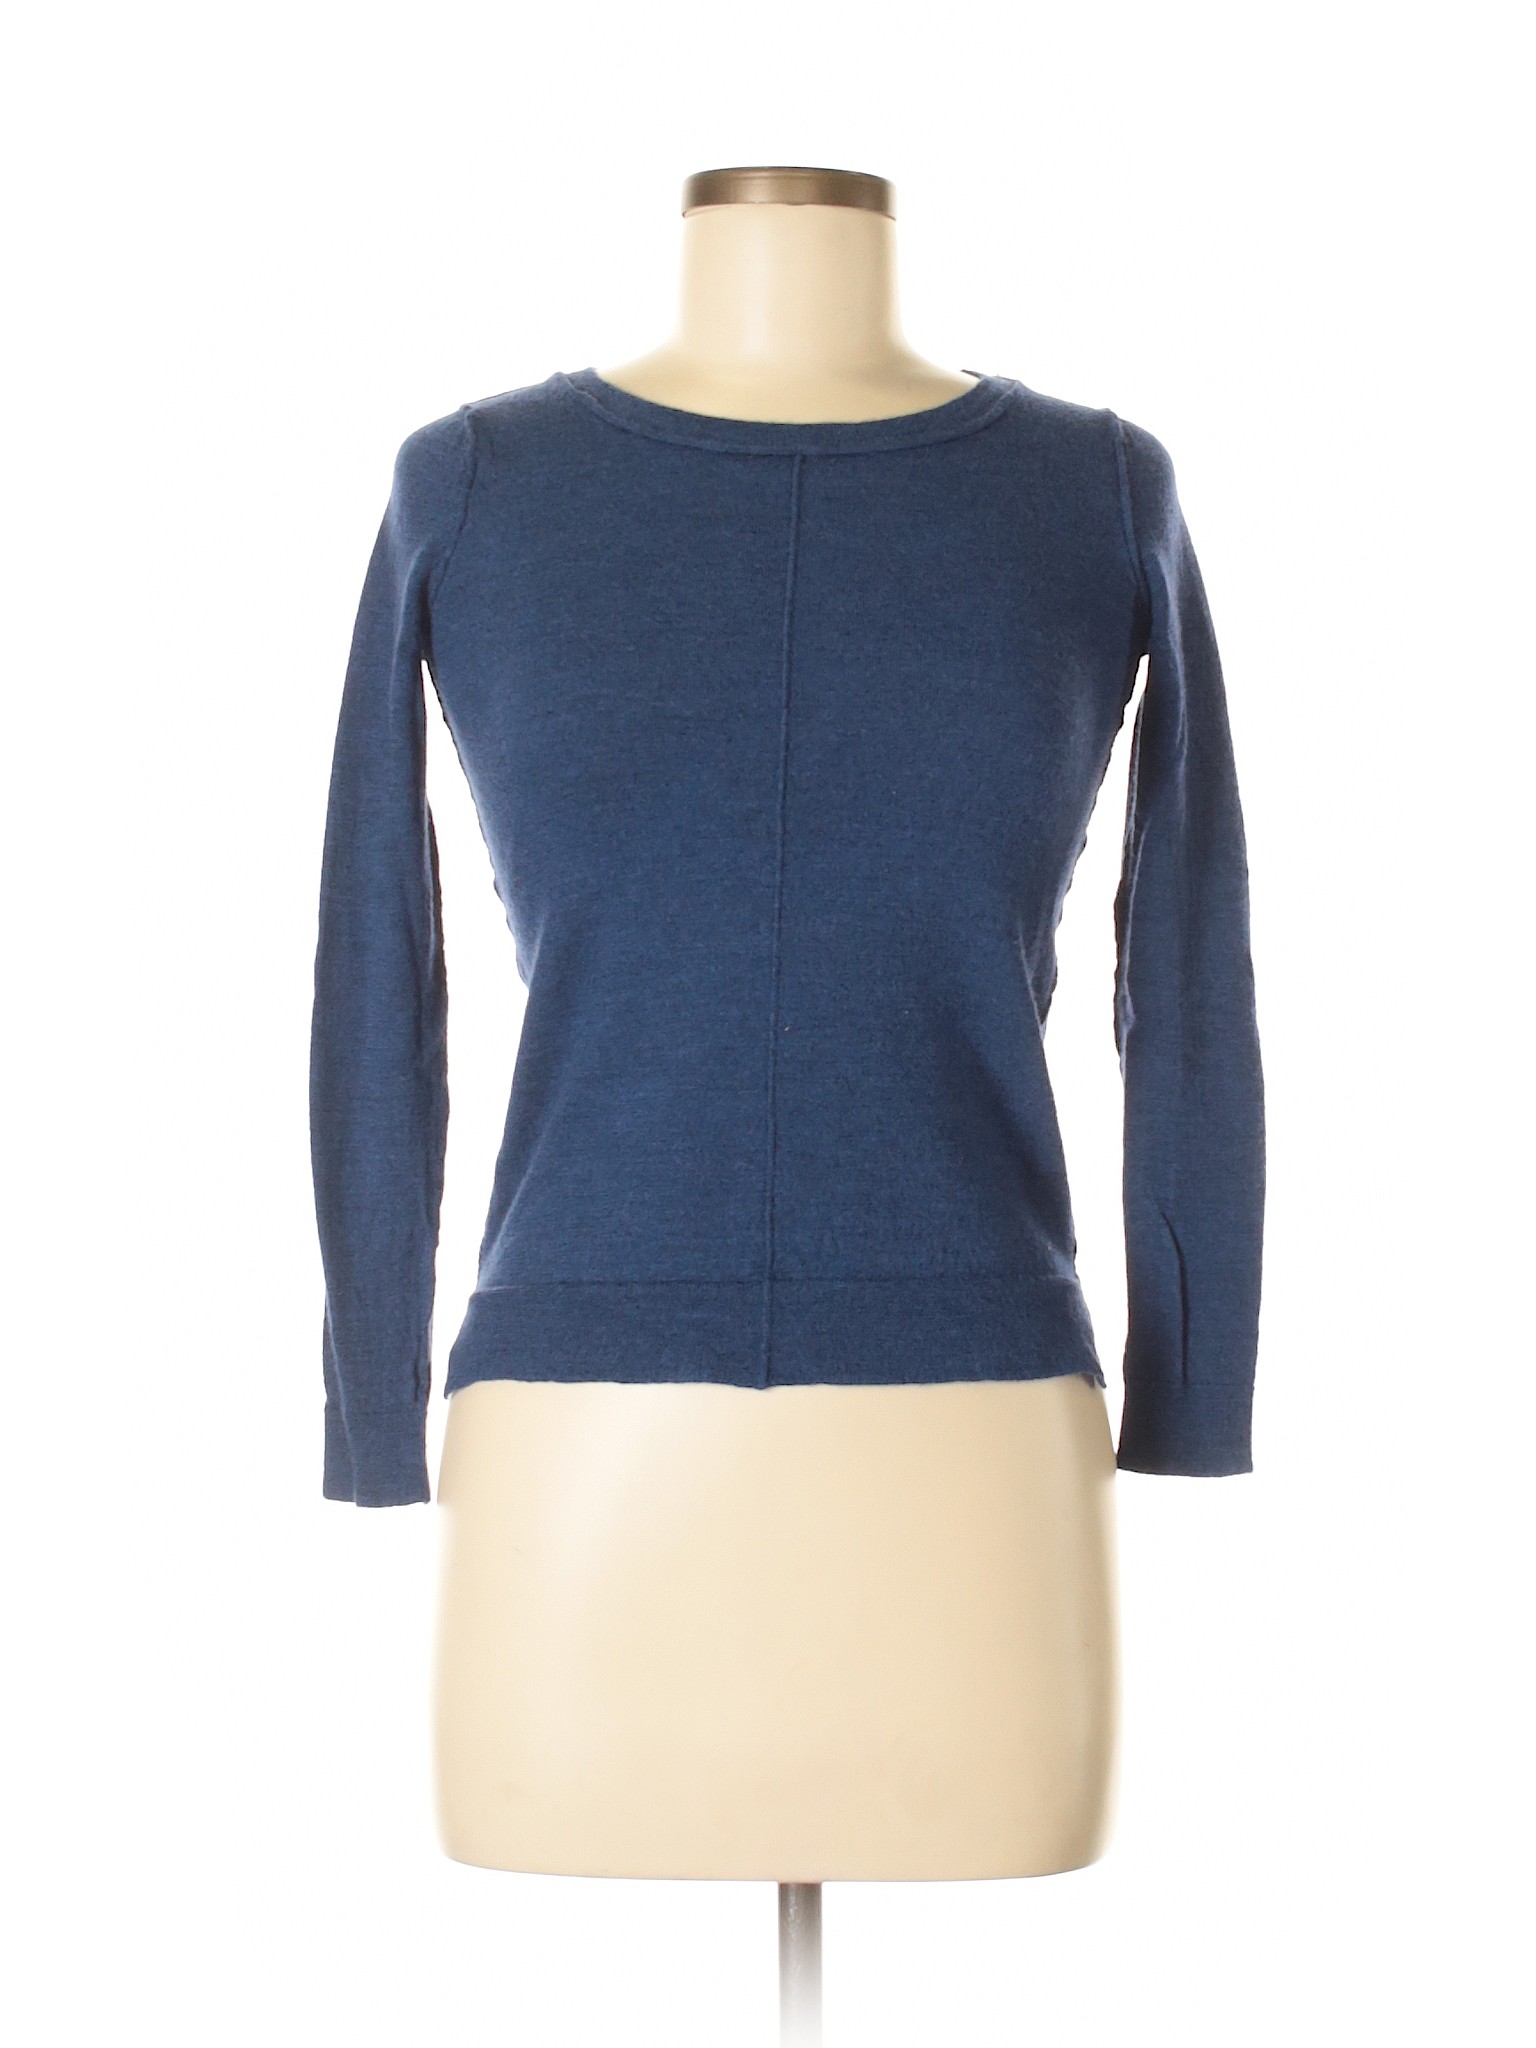 cynthia rowley for tj maxx Women's Pullover Sweaters On Sale Up To 90% ...